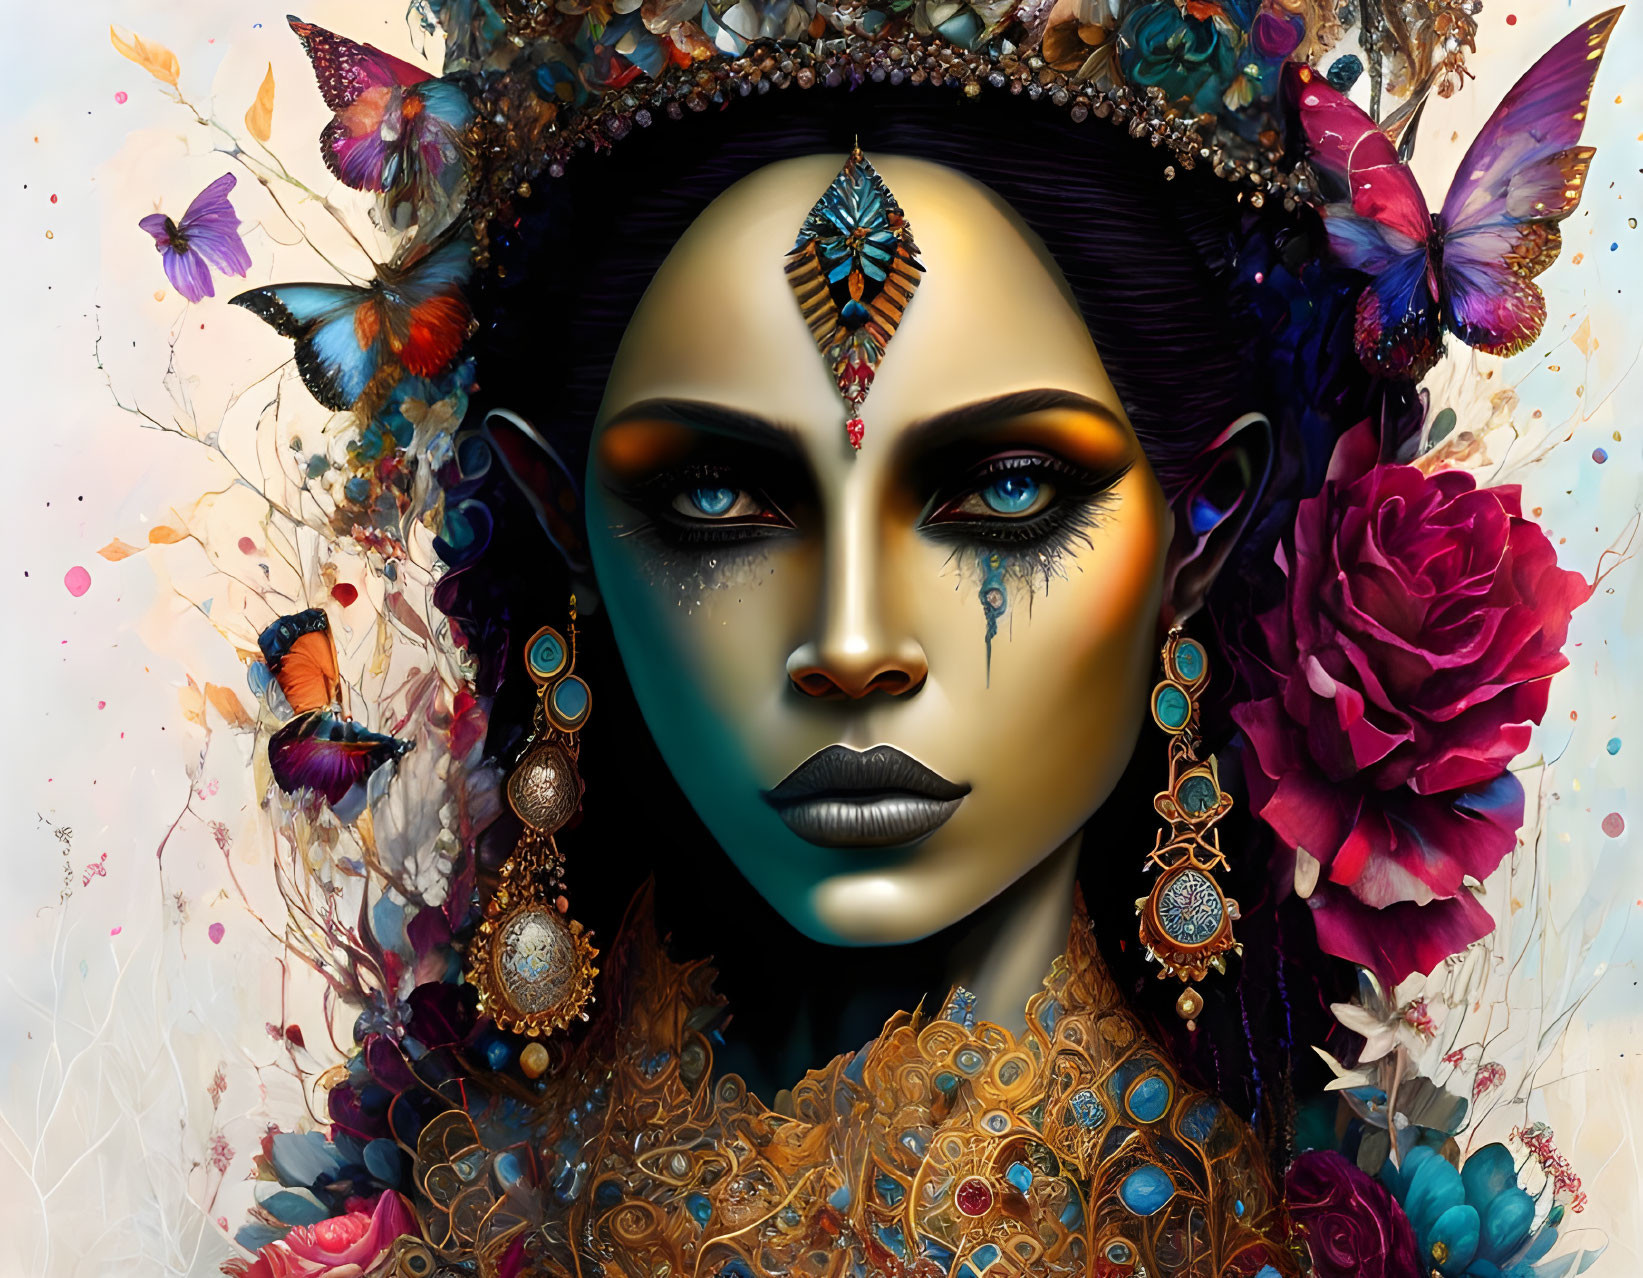 Detailed digital artwork: Woman with blue skin, ornate headdress, jewelry, and butterflies, ex